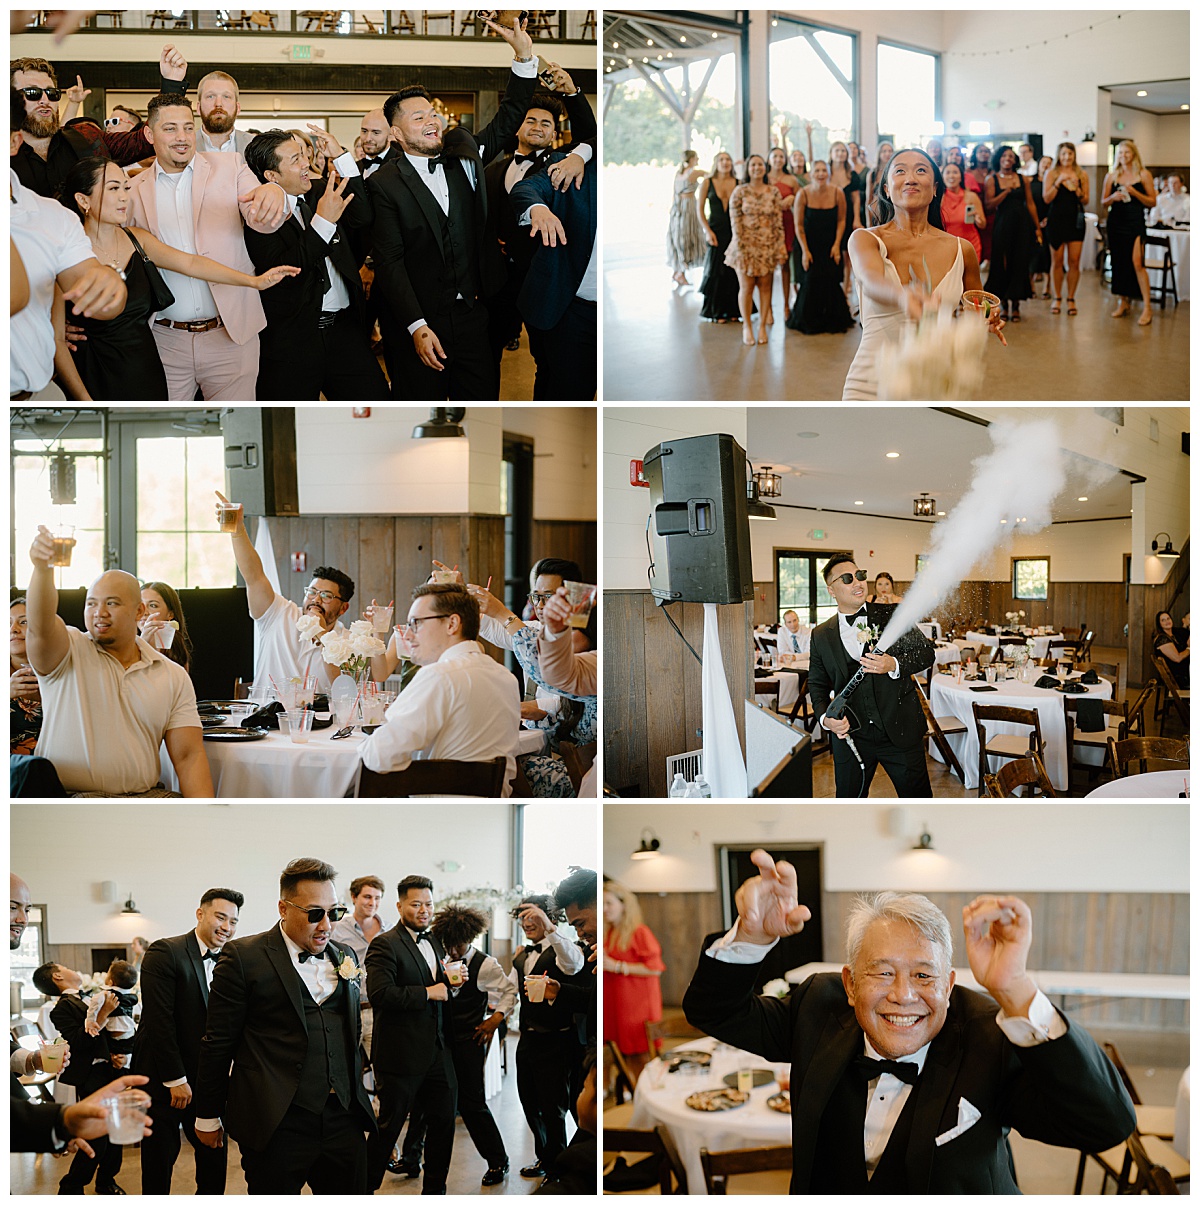 guests dance and toast at reception by Indigo Lace Collective